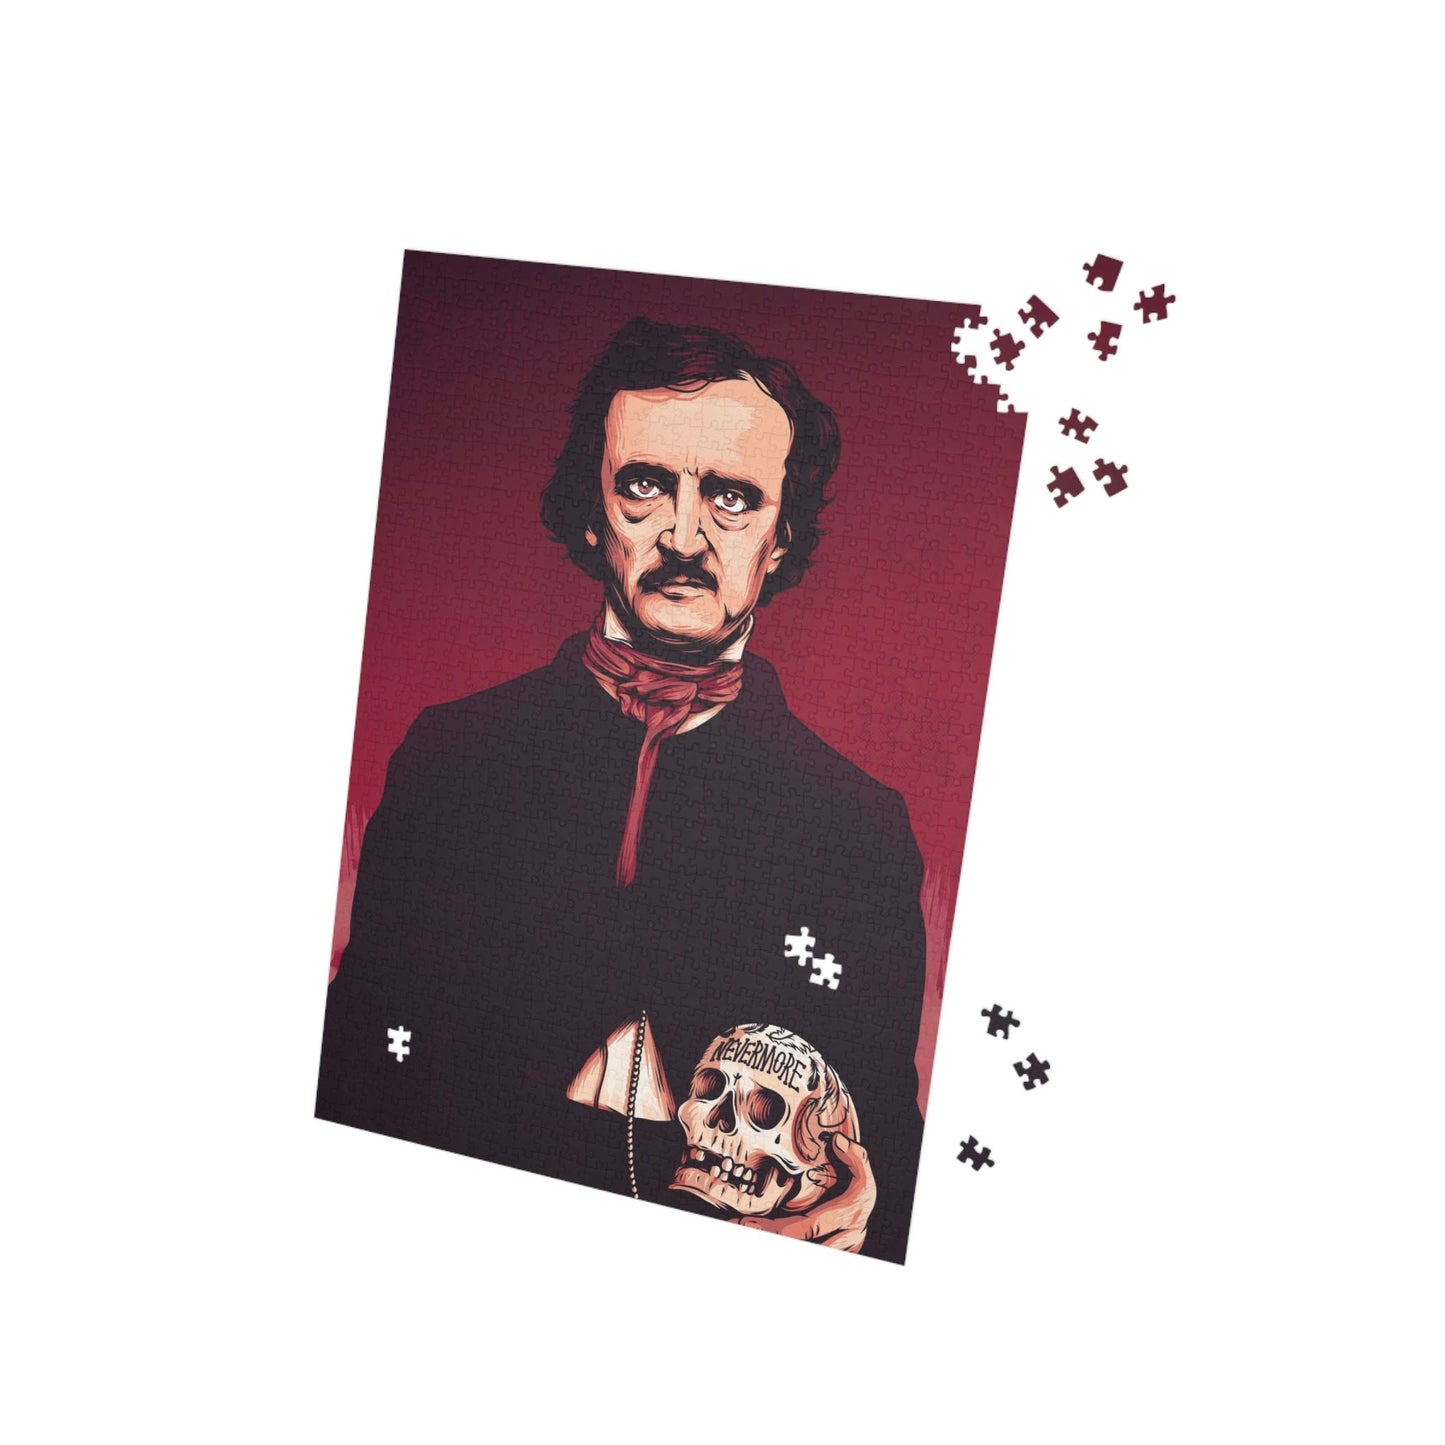 Edgar Allan Poe Illustrated Puzzle - 1,000 Piece Puzzle 2nd